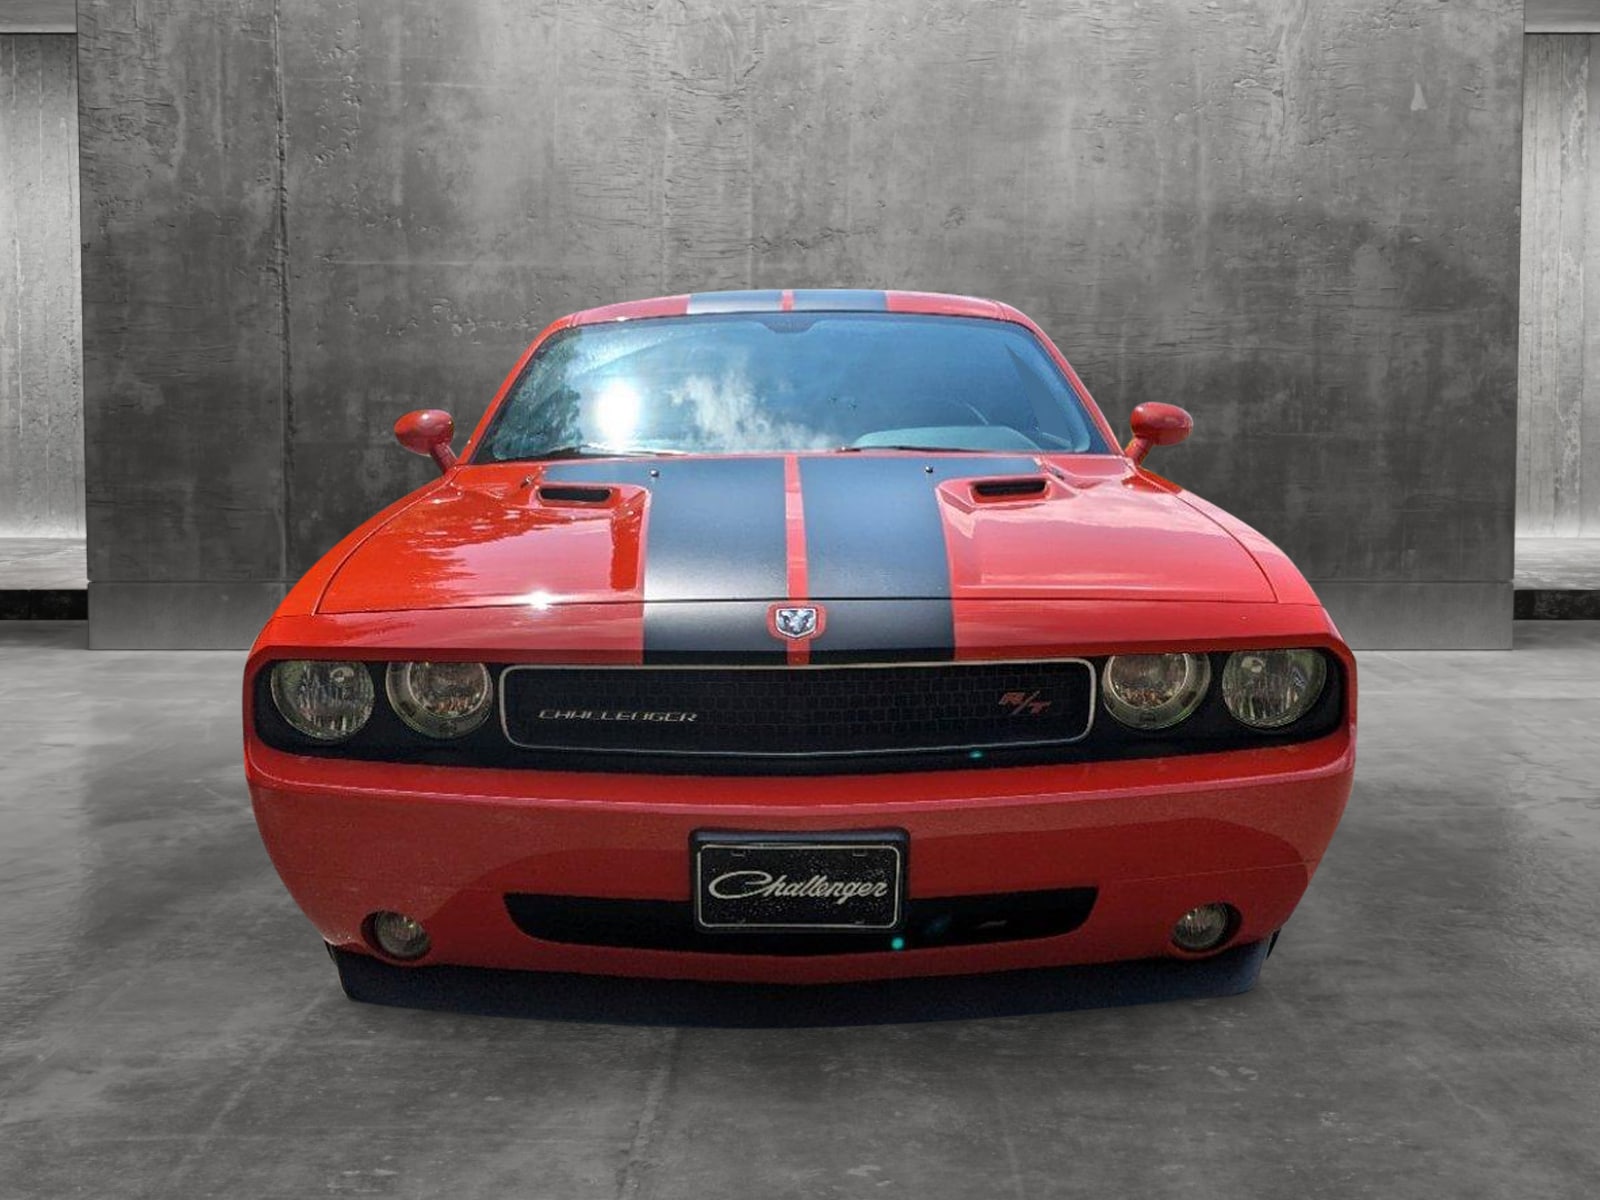 Used 2010 Dodge Challenger R/T with VIN 2B3CJ5DT7AH283426 for sale in Hardeeville, SC